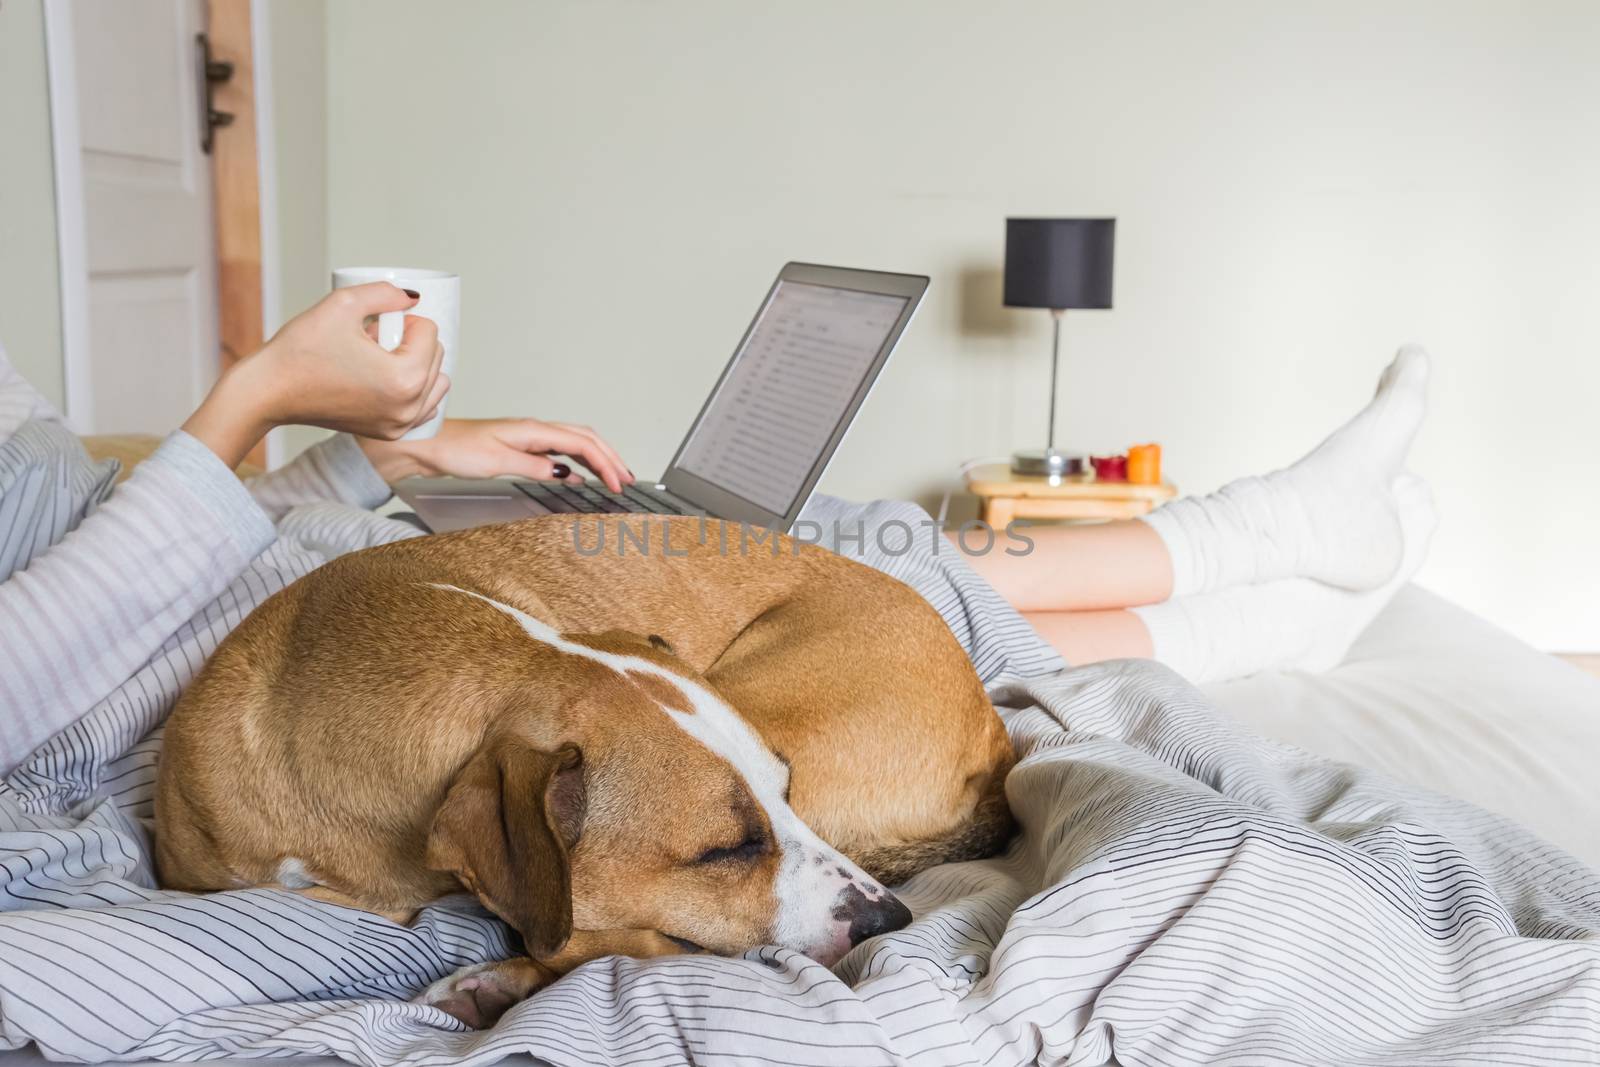 Female person drinking morning tea or coffee and working with laptop in bed with dog sleeping next to her